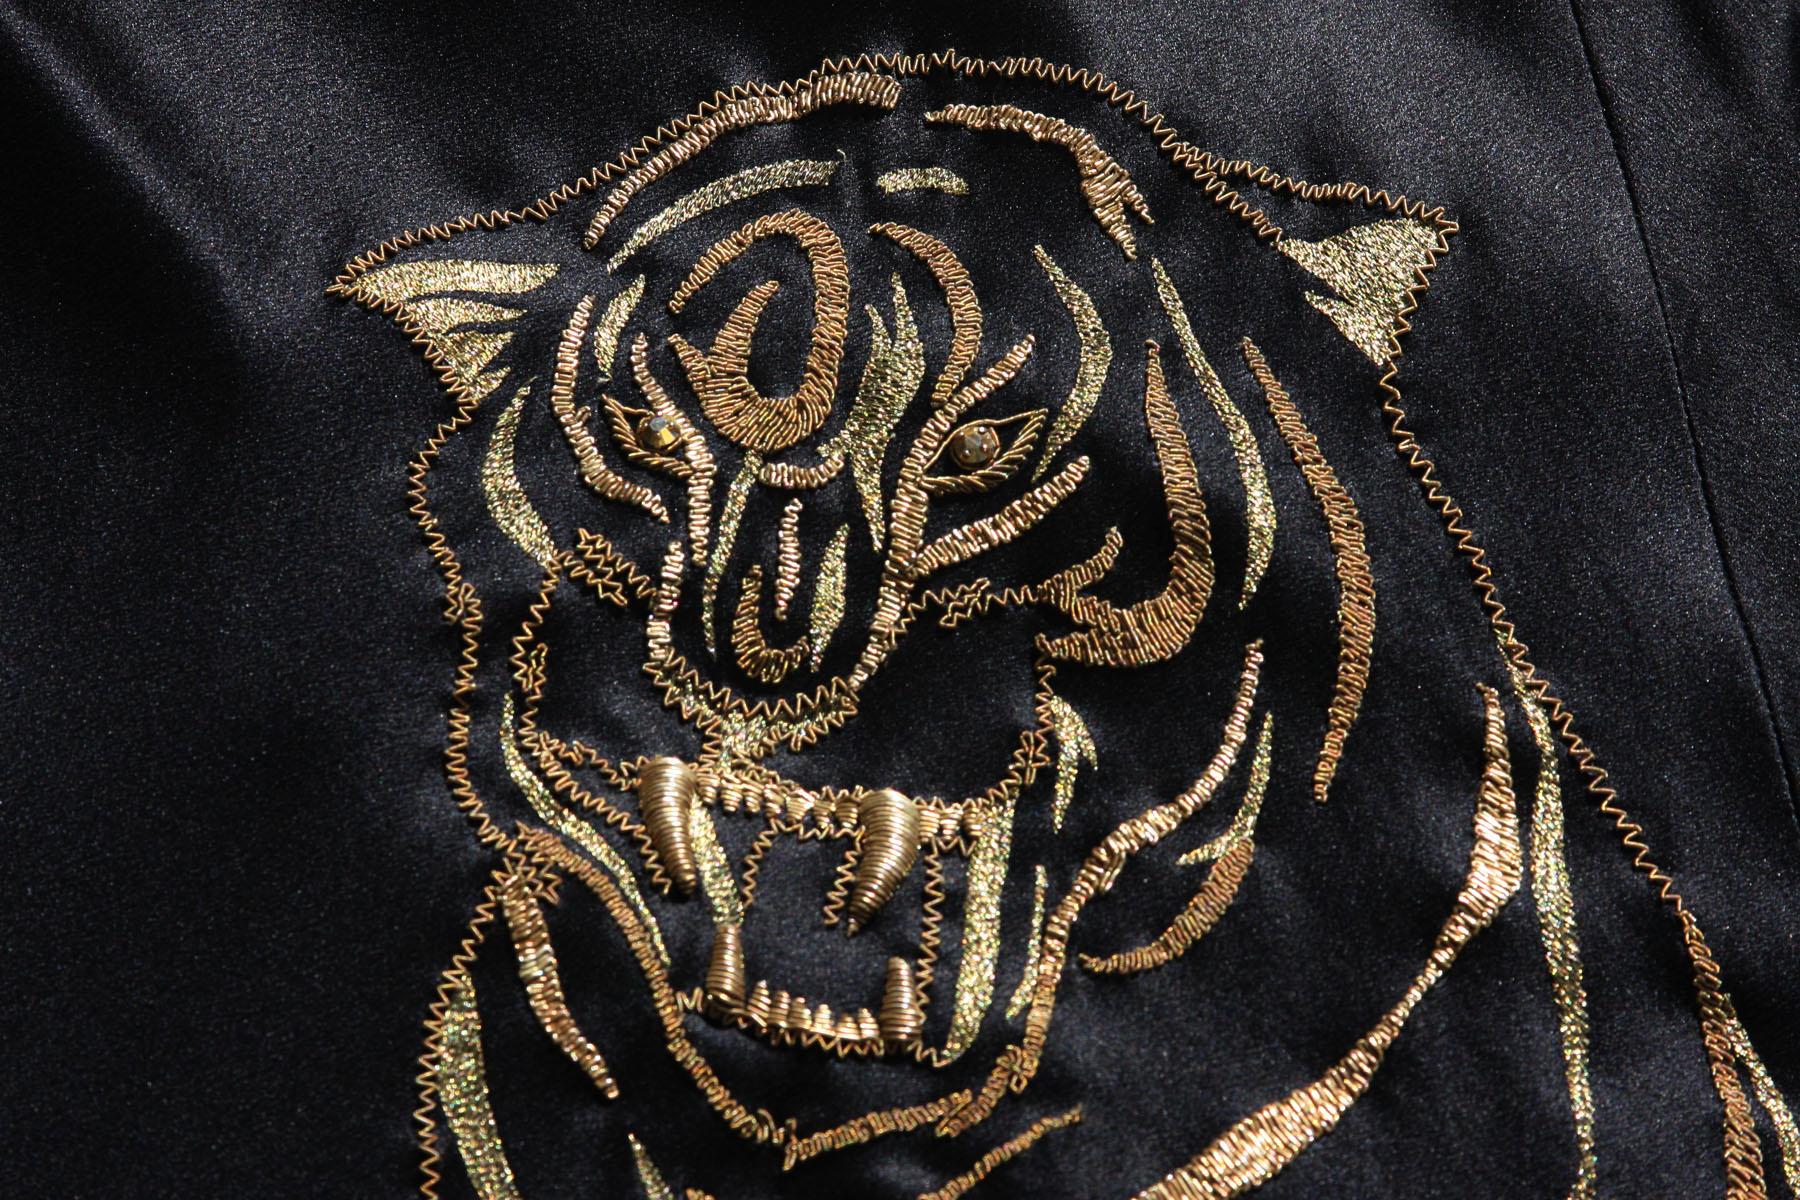 Alexander McQueen 2007 Gold Embroidered Tiger Dress 42 as seen on MARY STUART TV For Sale 1